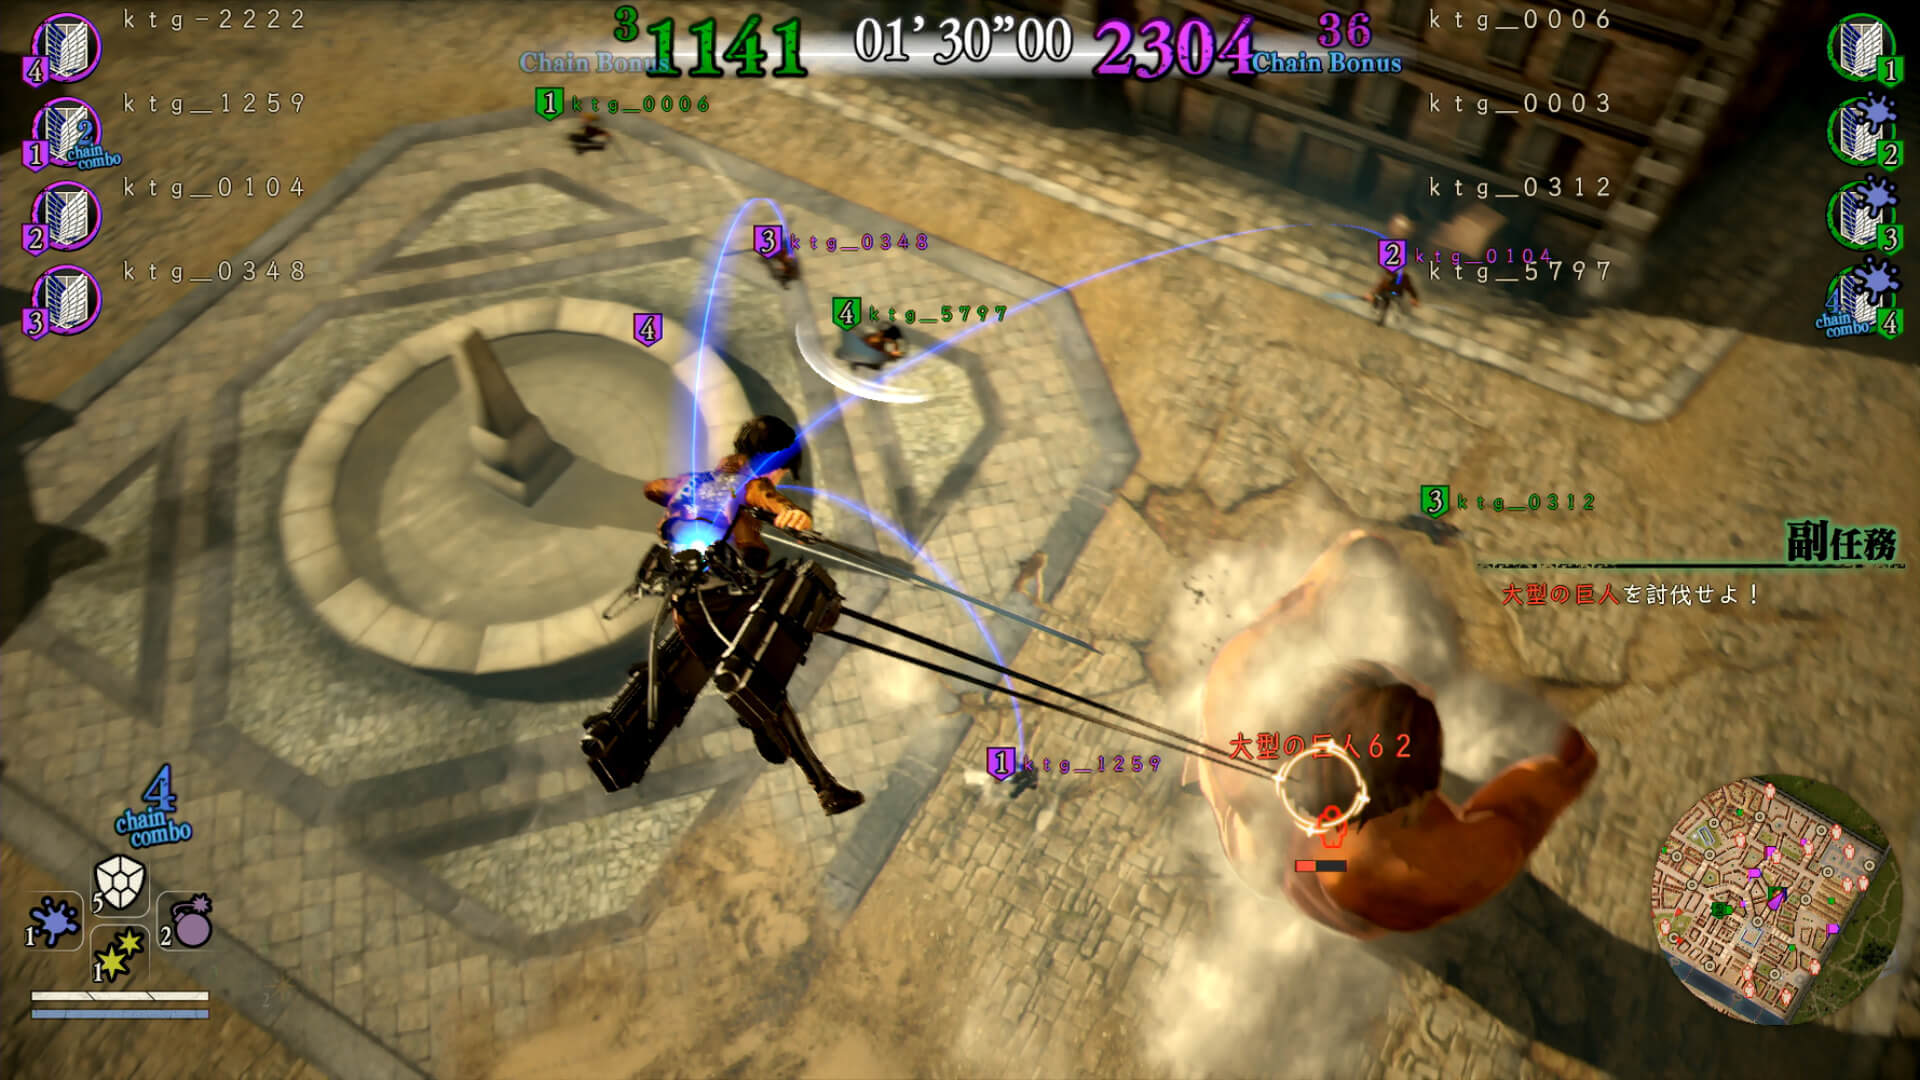 Attack on Titan Co-op and Online Features Revealed